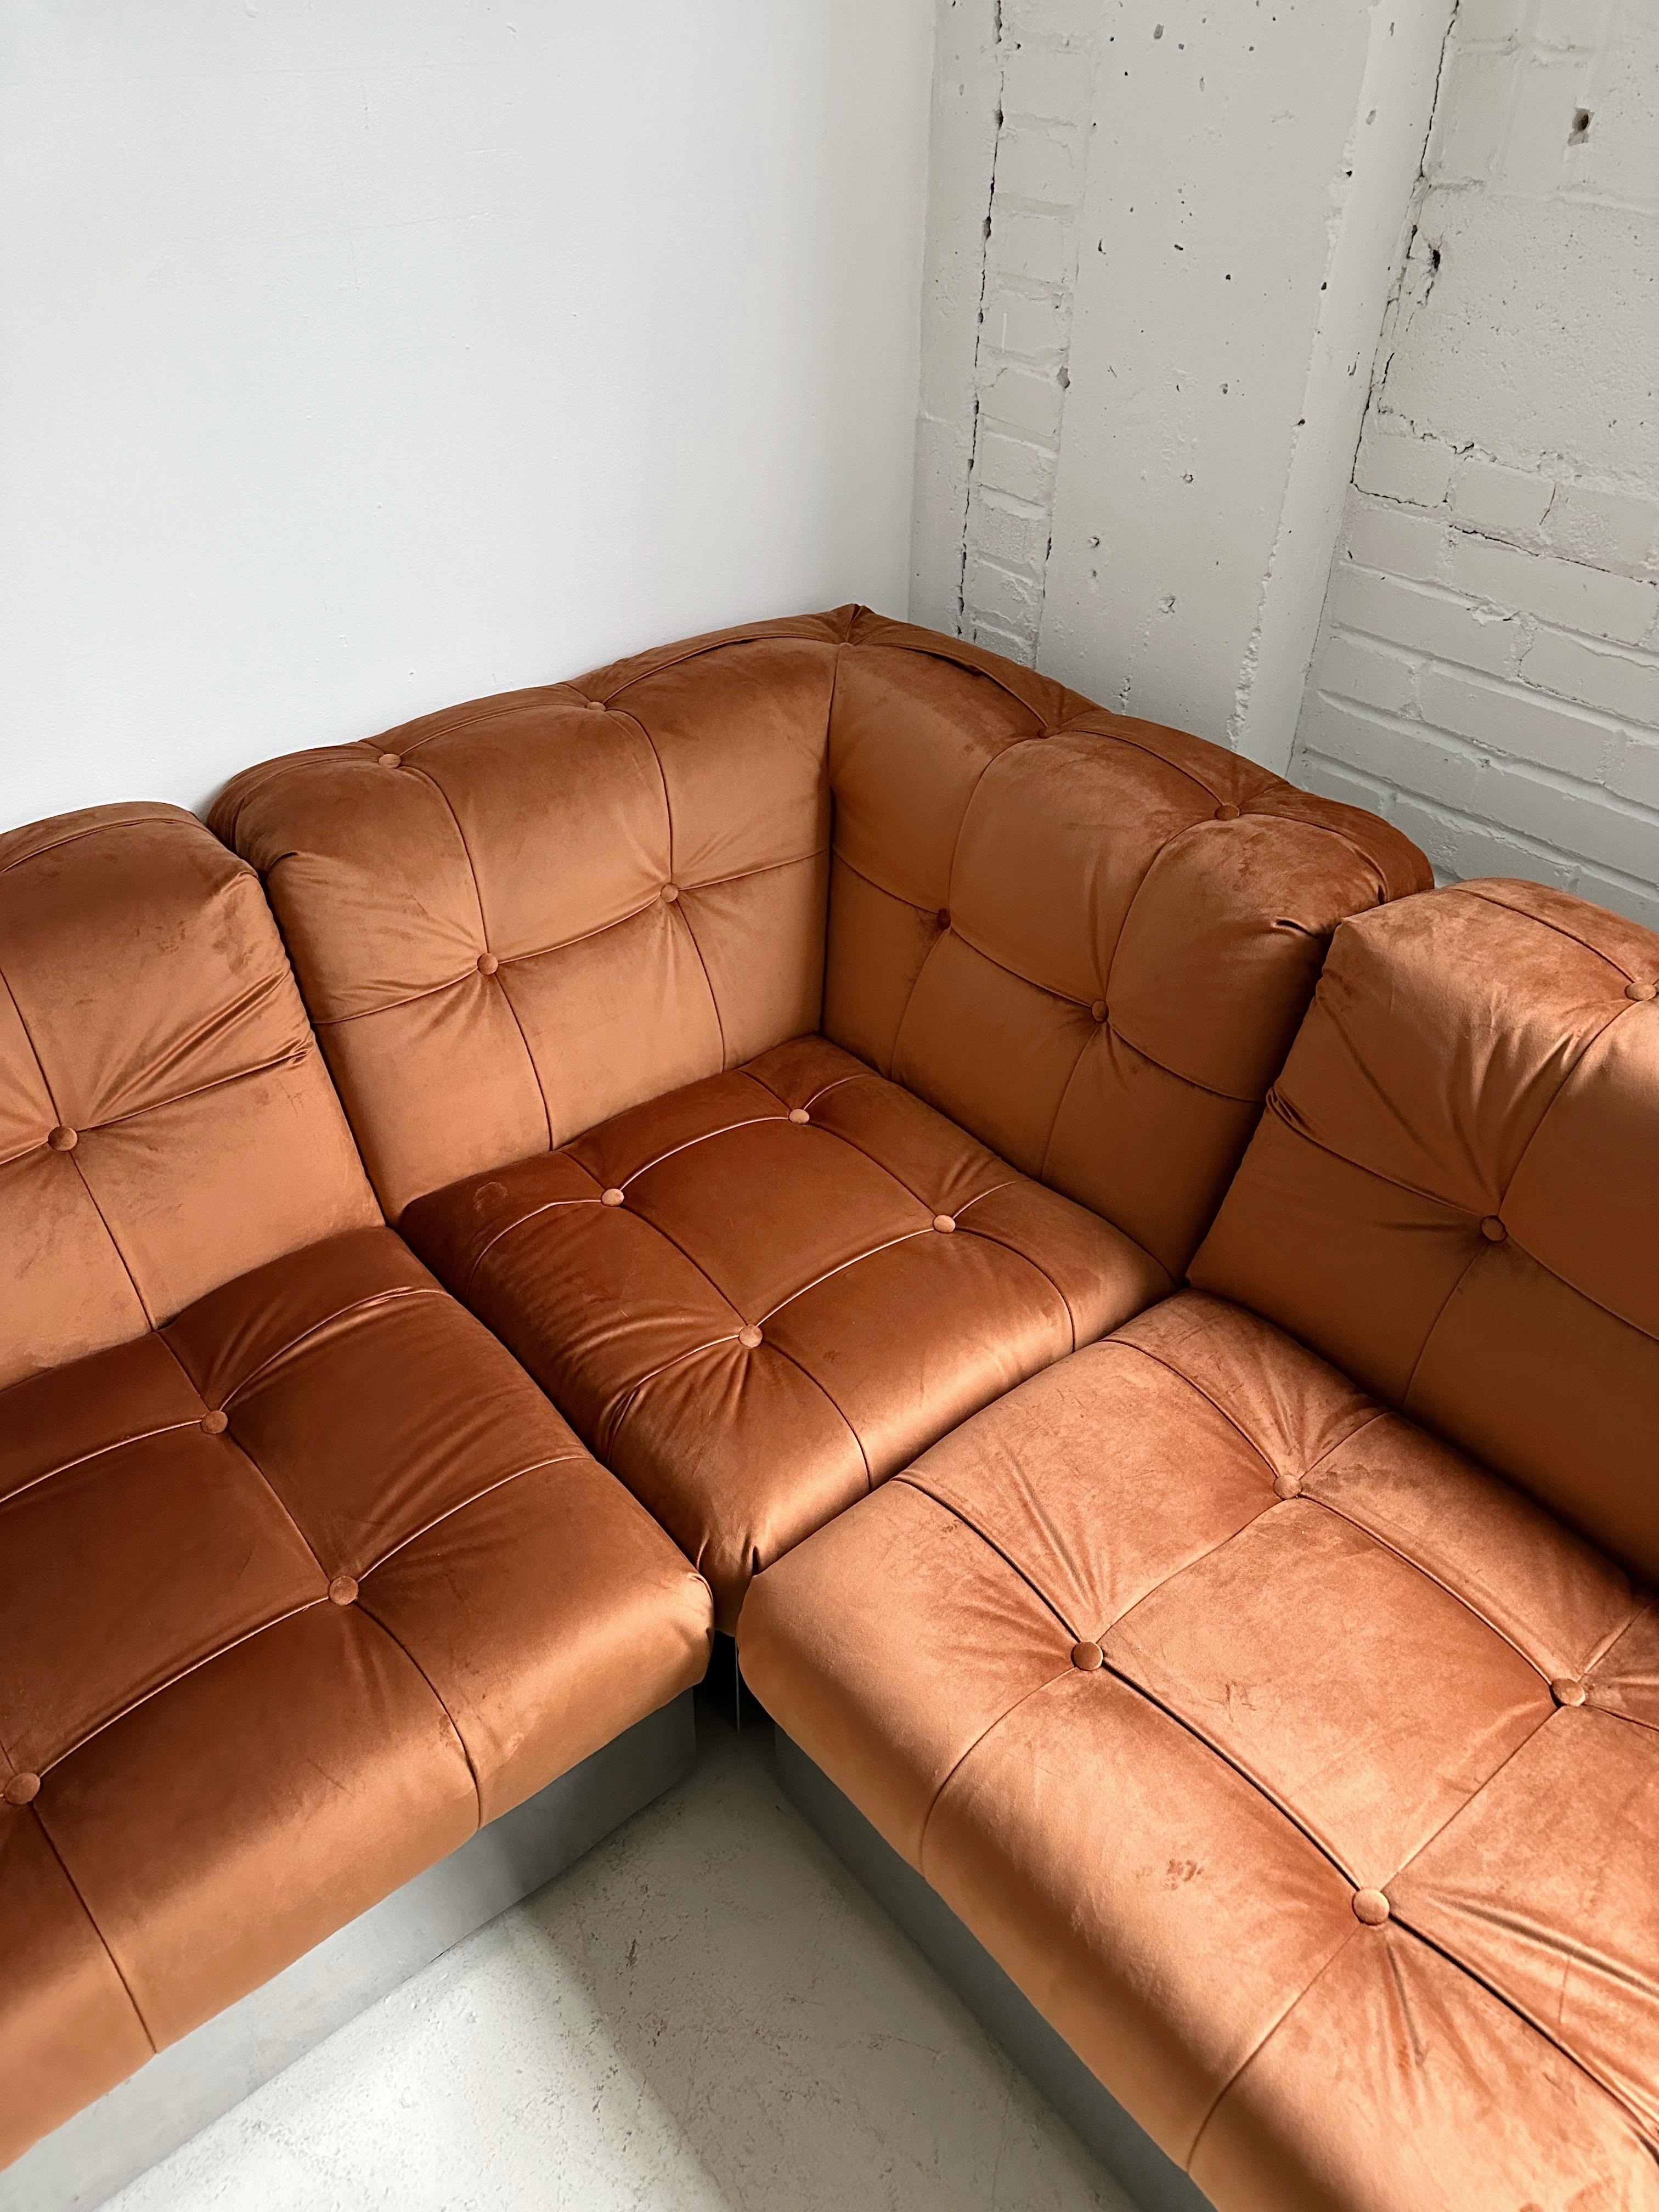 Vintage Terracotta Velvet & Steel Base 4 Piece Modular Sofa attributed to Canasta by Giorgio Montani for Souplina, 70's

Consists of 2 corner and 2 middle pieces

//

Dimensions:
Each corner piece: 32.5”W x 32.5”D x 27”H seat height 15